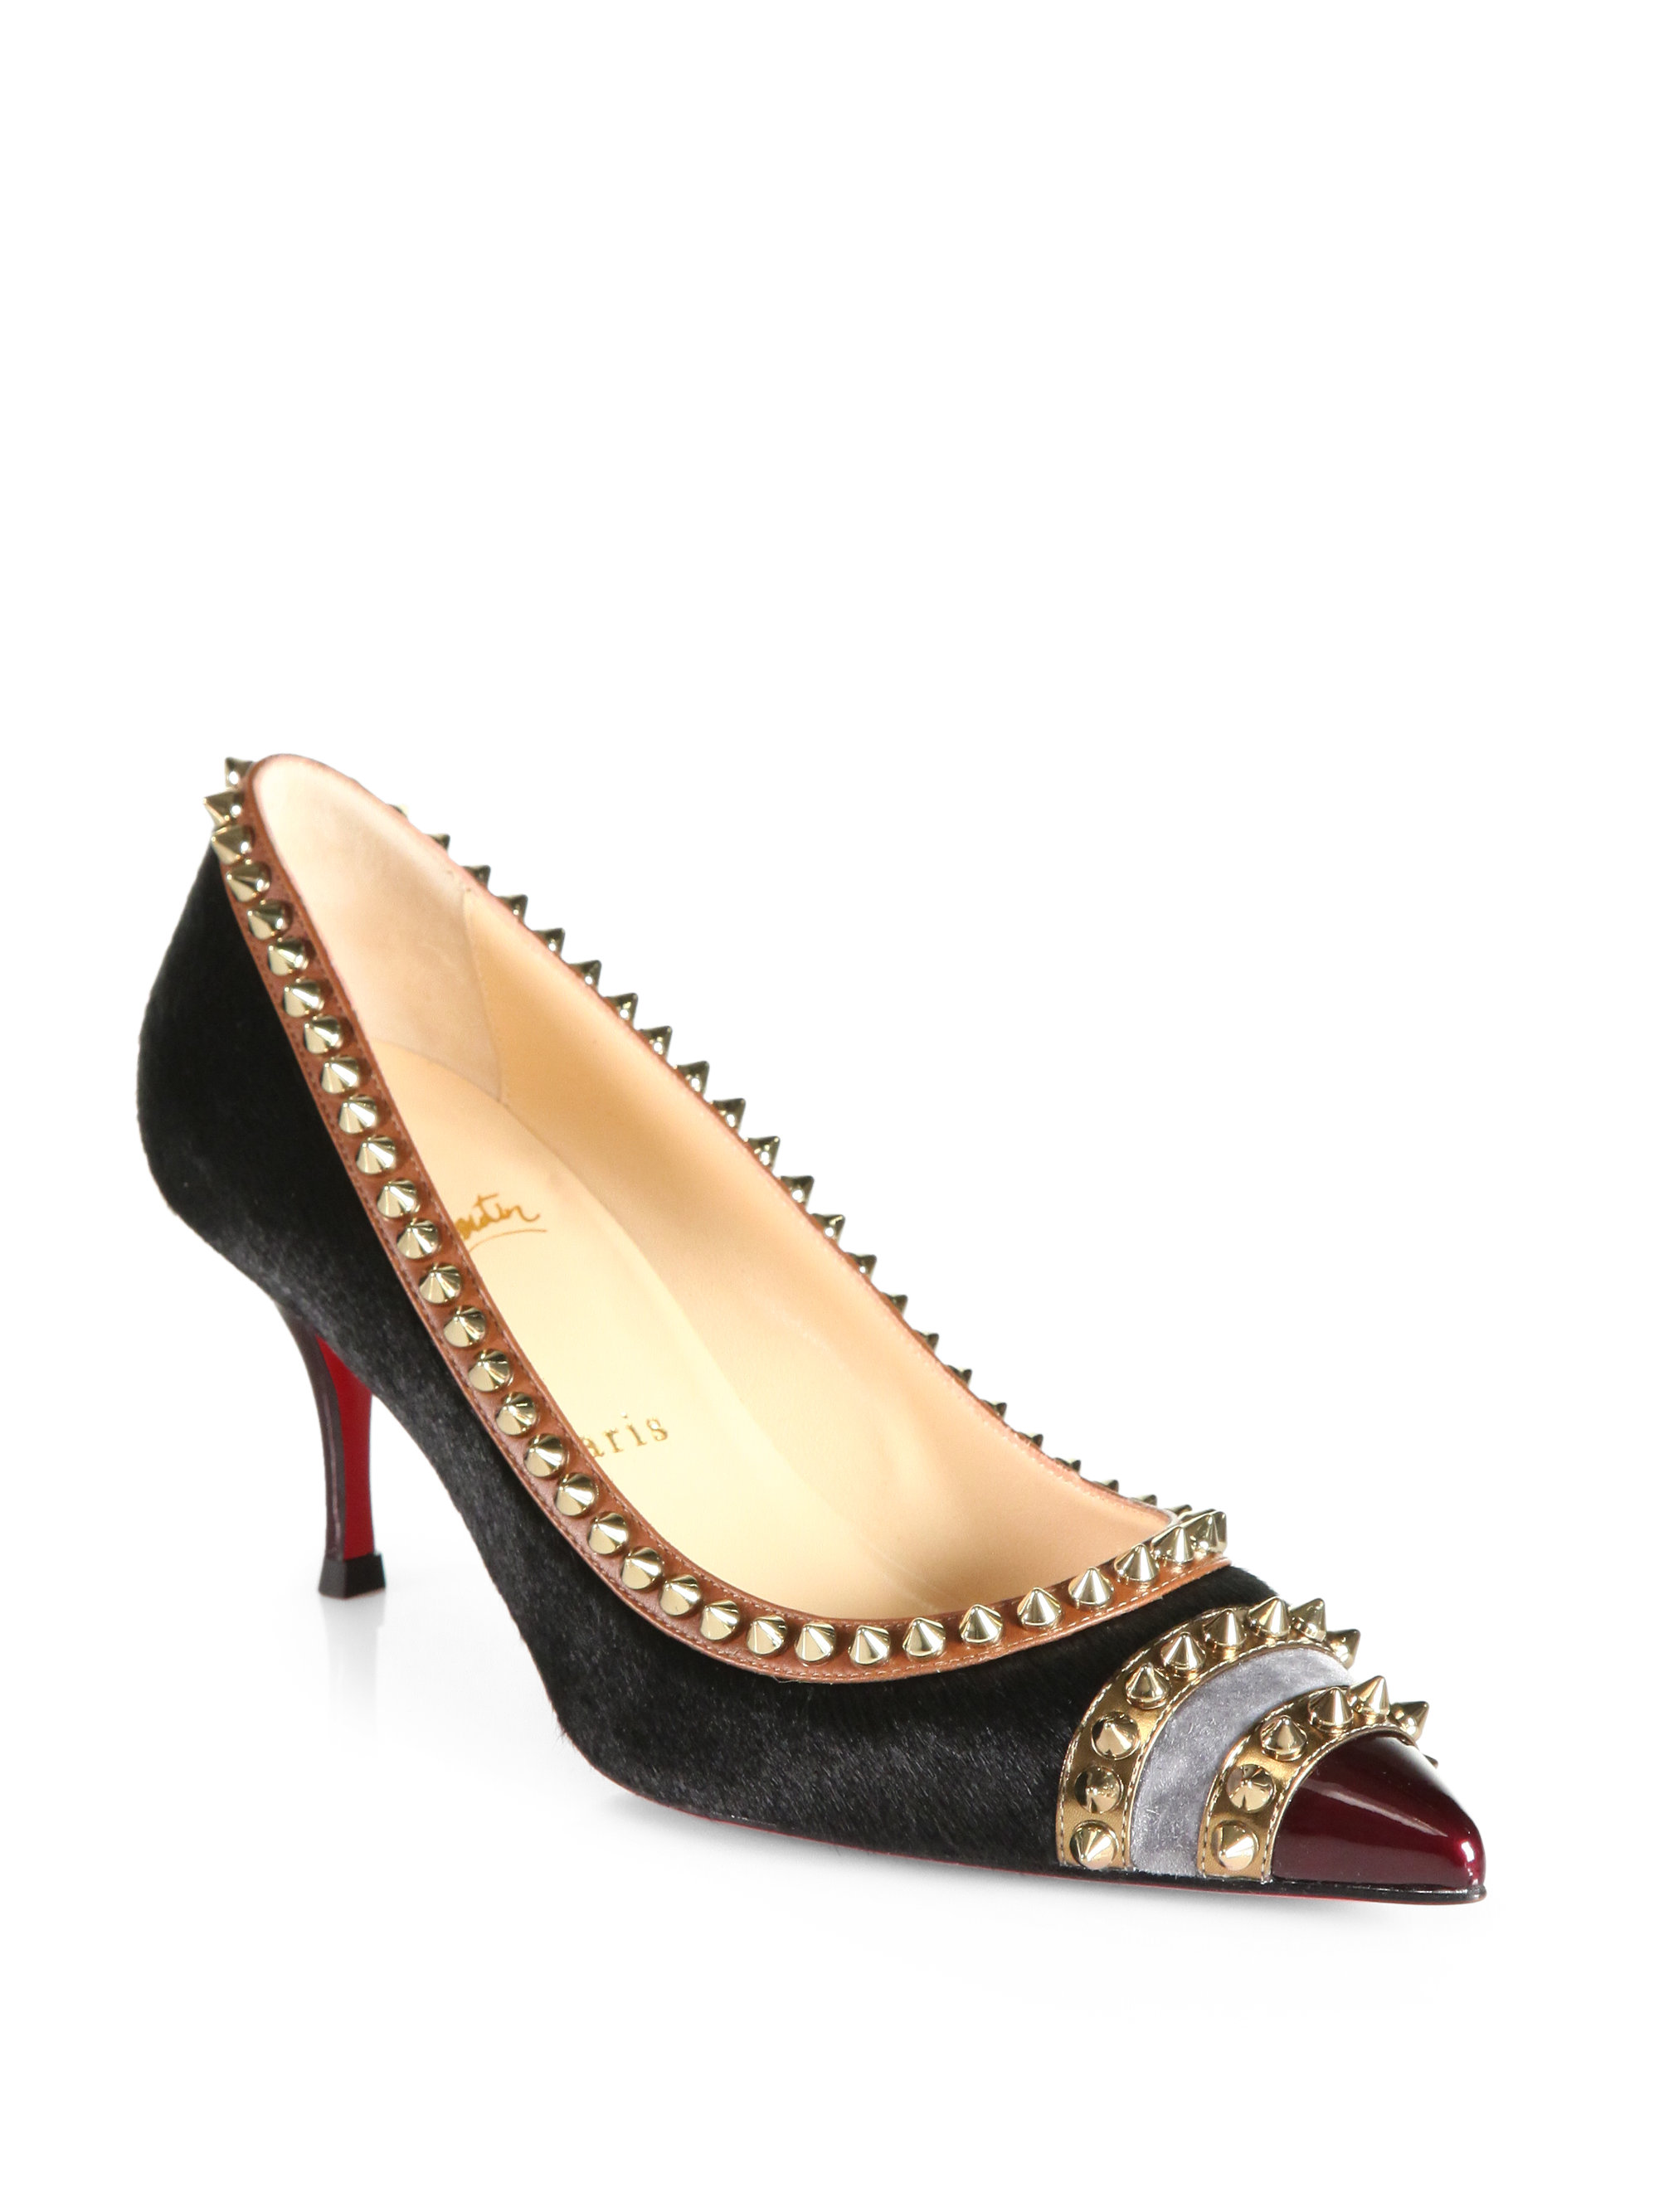 Christian louboutin Malabar Hill Spiked Pony Hair Leather Pumps in ...